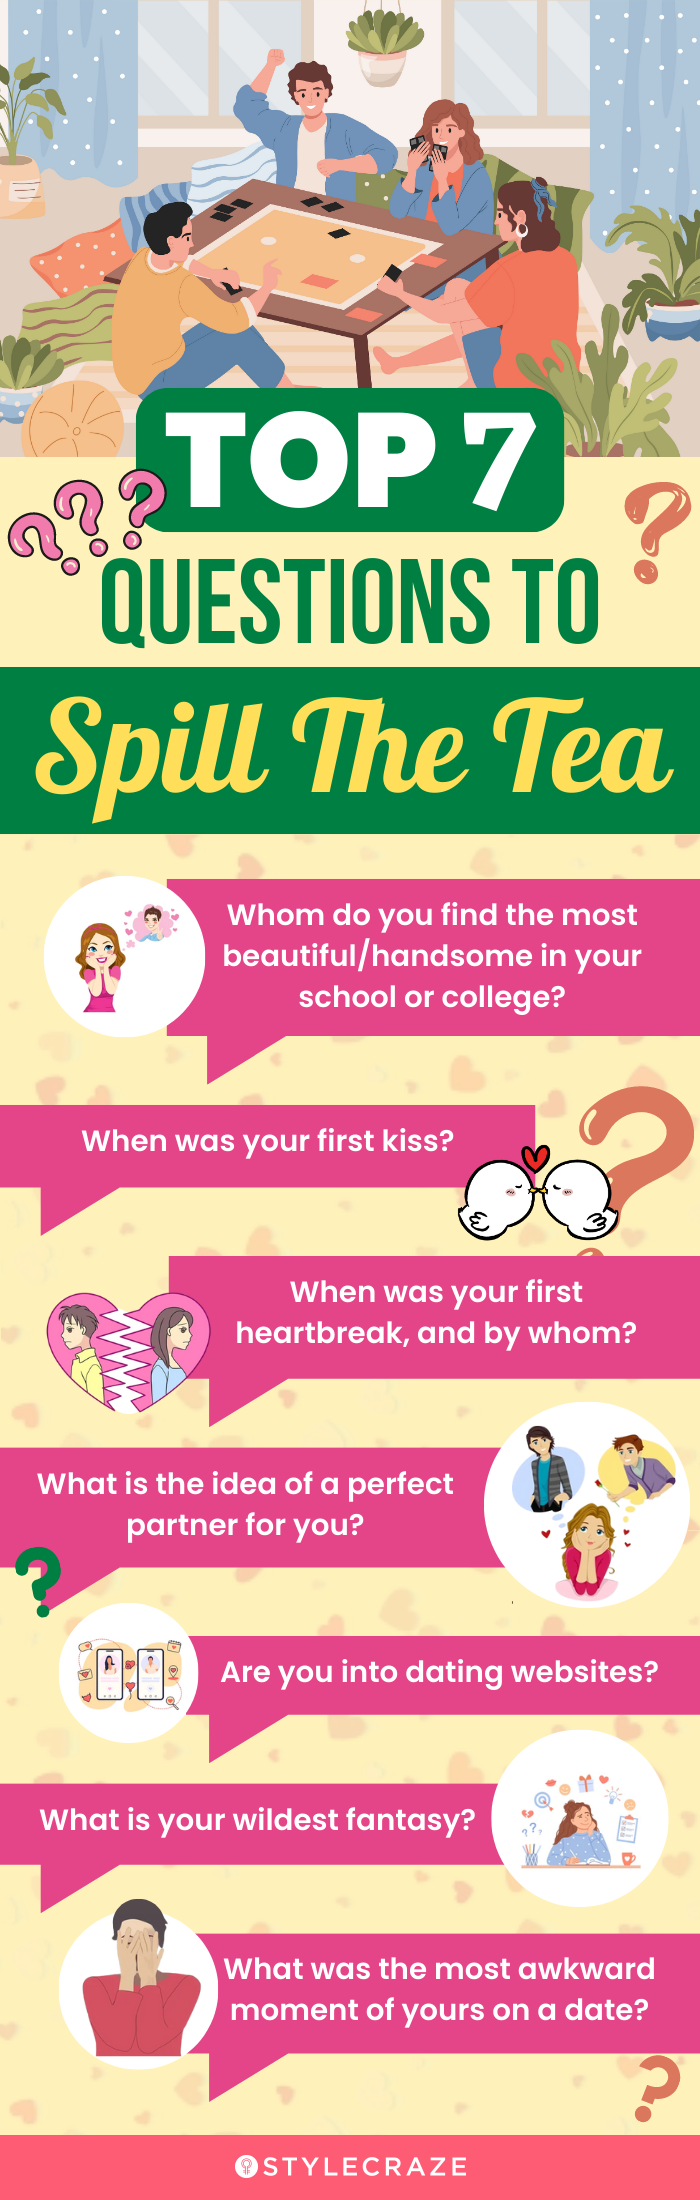 top 7 questions to spill the tea (infographic)